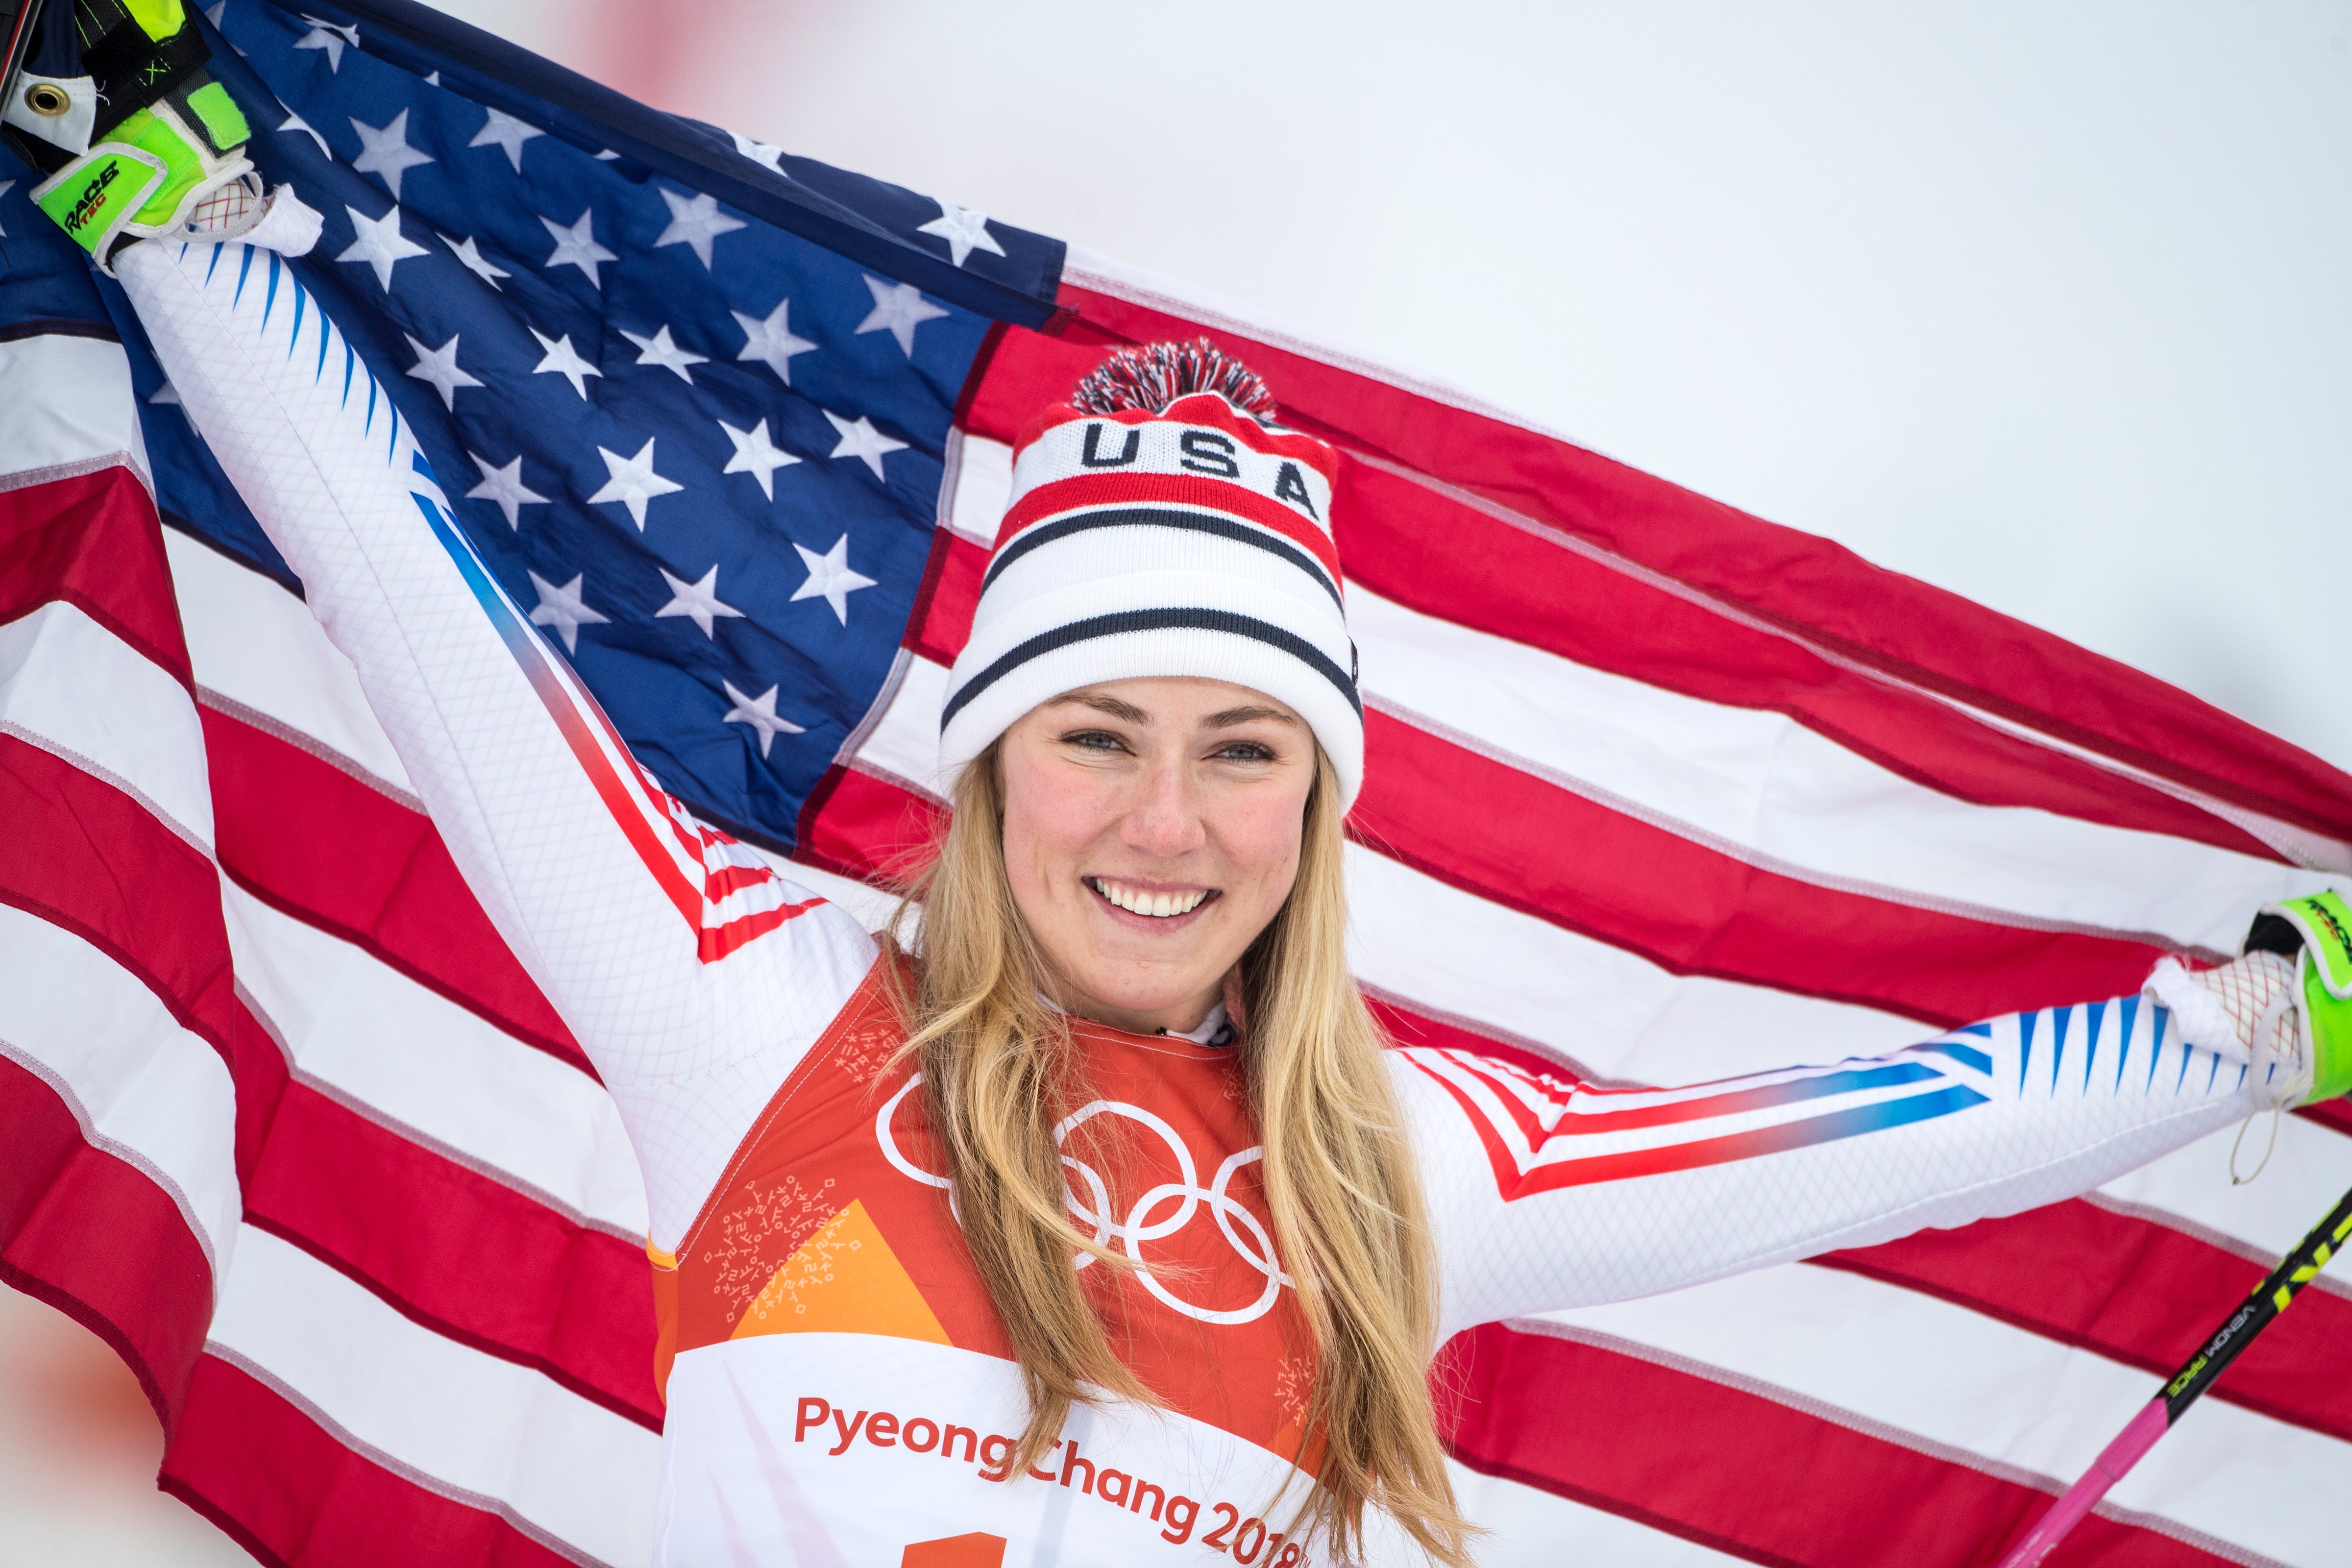 Silver medalist Mikaela Shiffrin #19 of the United States at the presentations after the Alpine Skiing - Ladies' Alpine Combined Slalom at Jeongseon Alpine Centre on February 22, 2018 in PyeongChang, South Korea. (Tim Clayton - Corbis&mdash;Corbis/Getty Images)